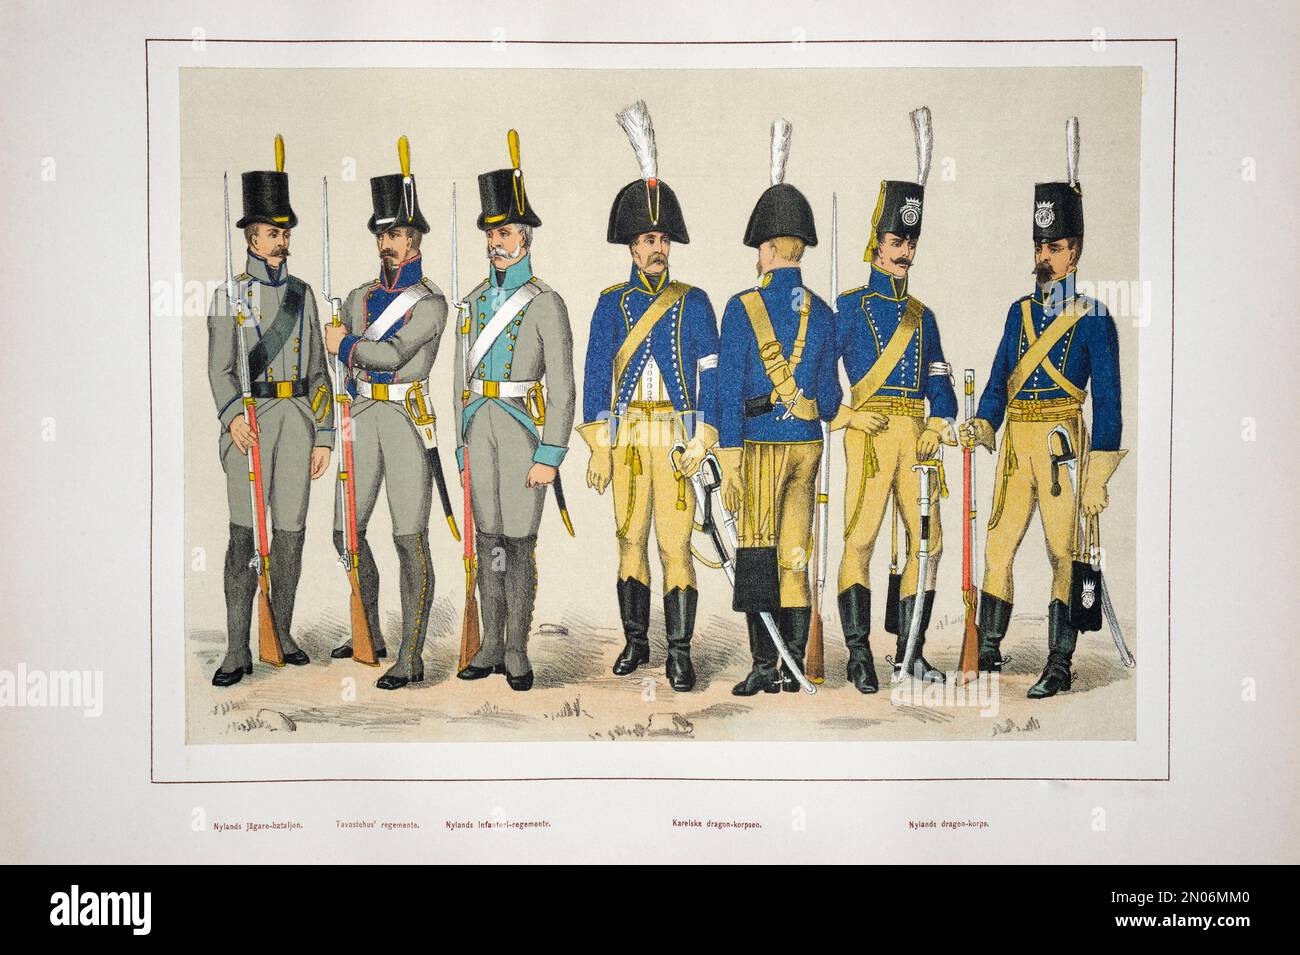 The Finnish army units and uniforms 1809-1809. A Uusimaa's Jäger Battalion, a Tavastehus' Regiment, a Uusimaa's Infantry Regiment, a Karelia's cavalry Stock Photo